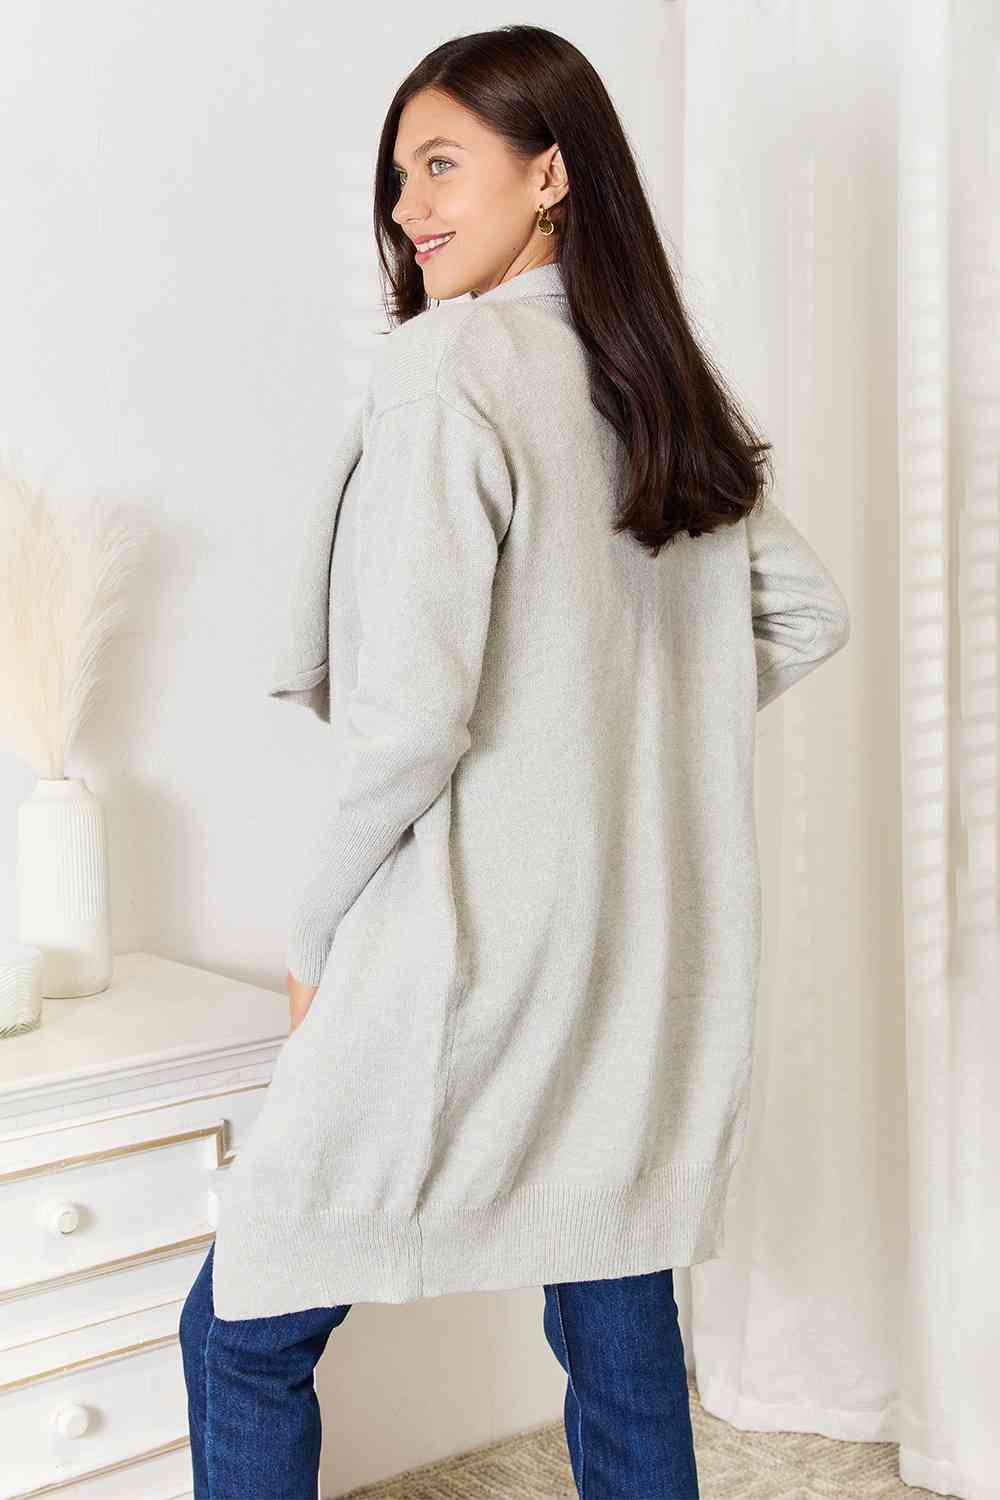 Double Take Open Front Duster Cardigan with Pockets - EMMY